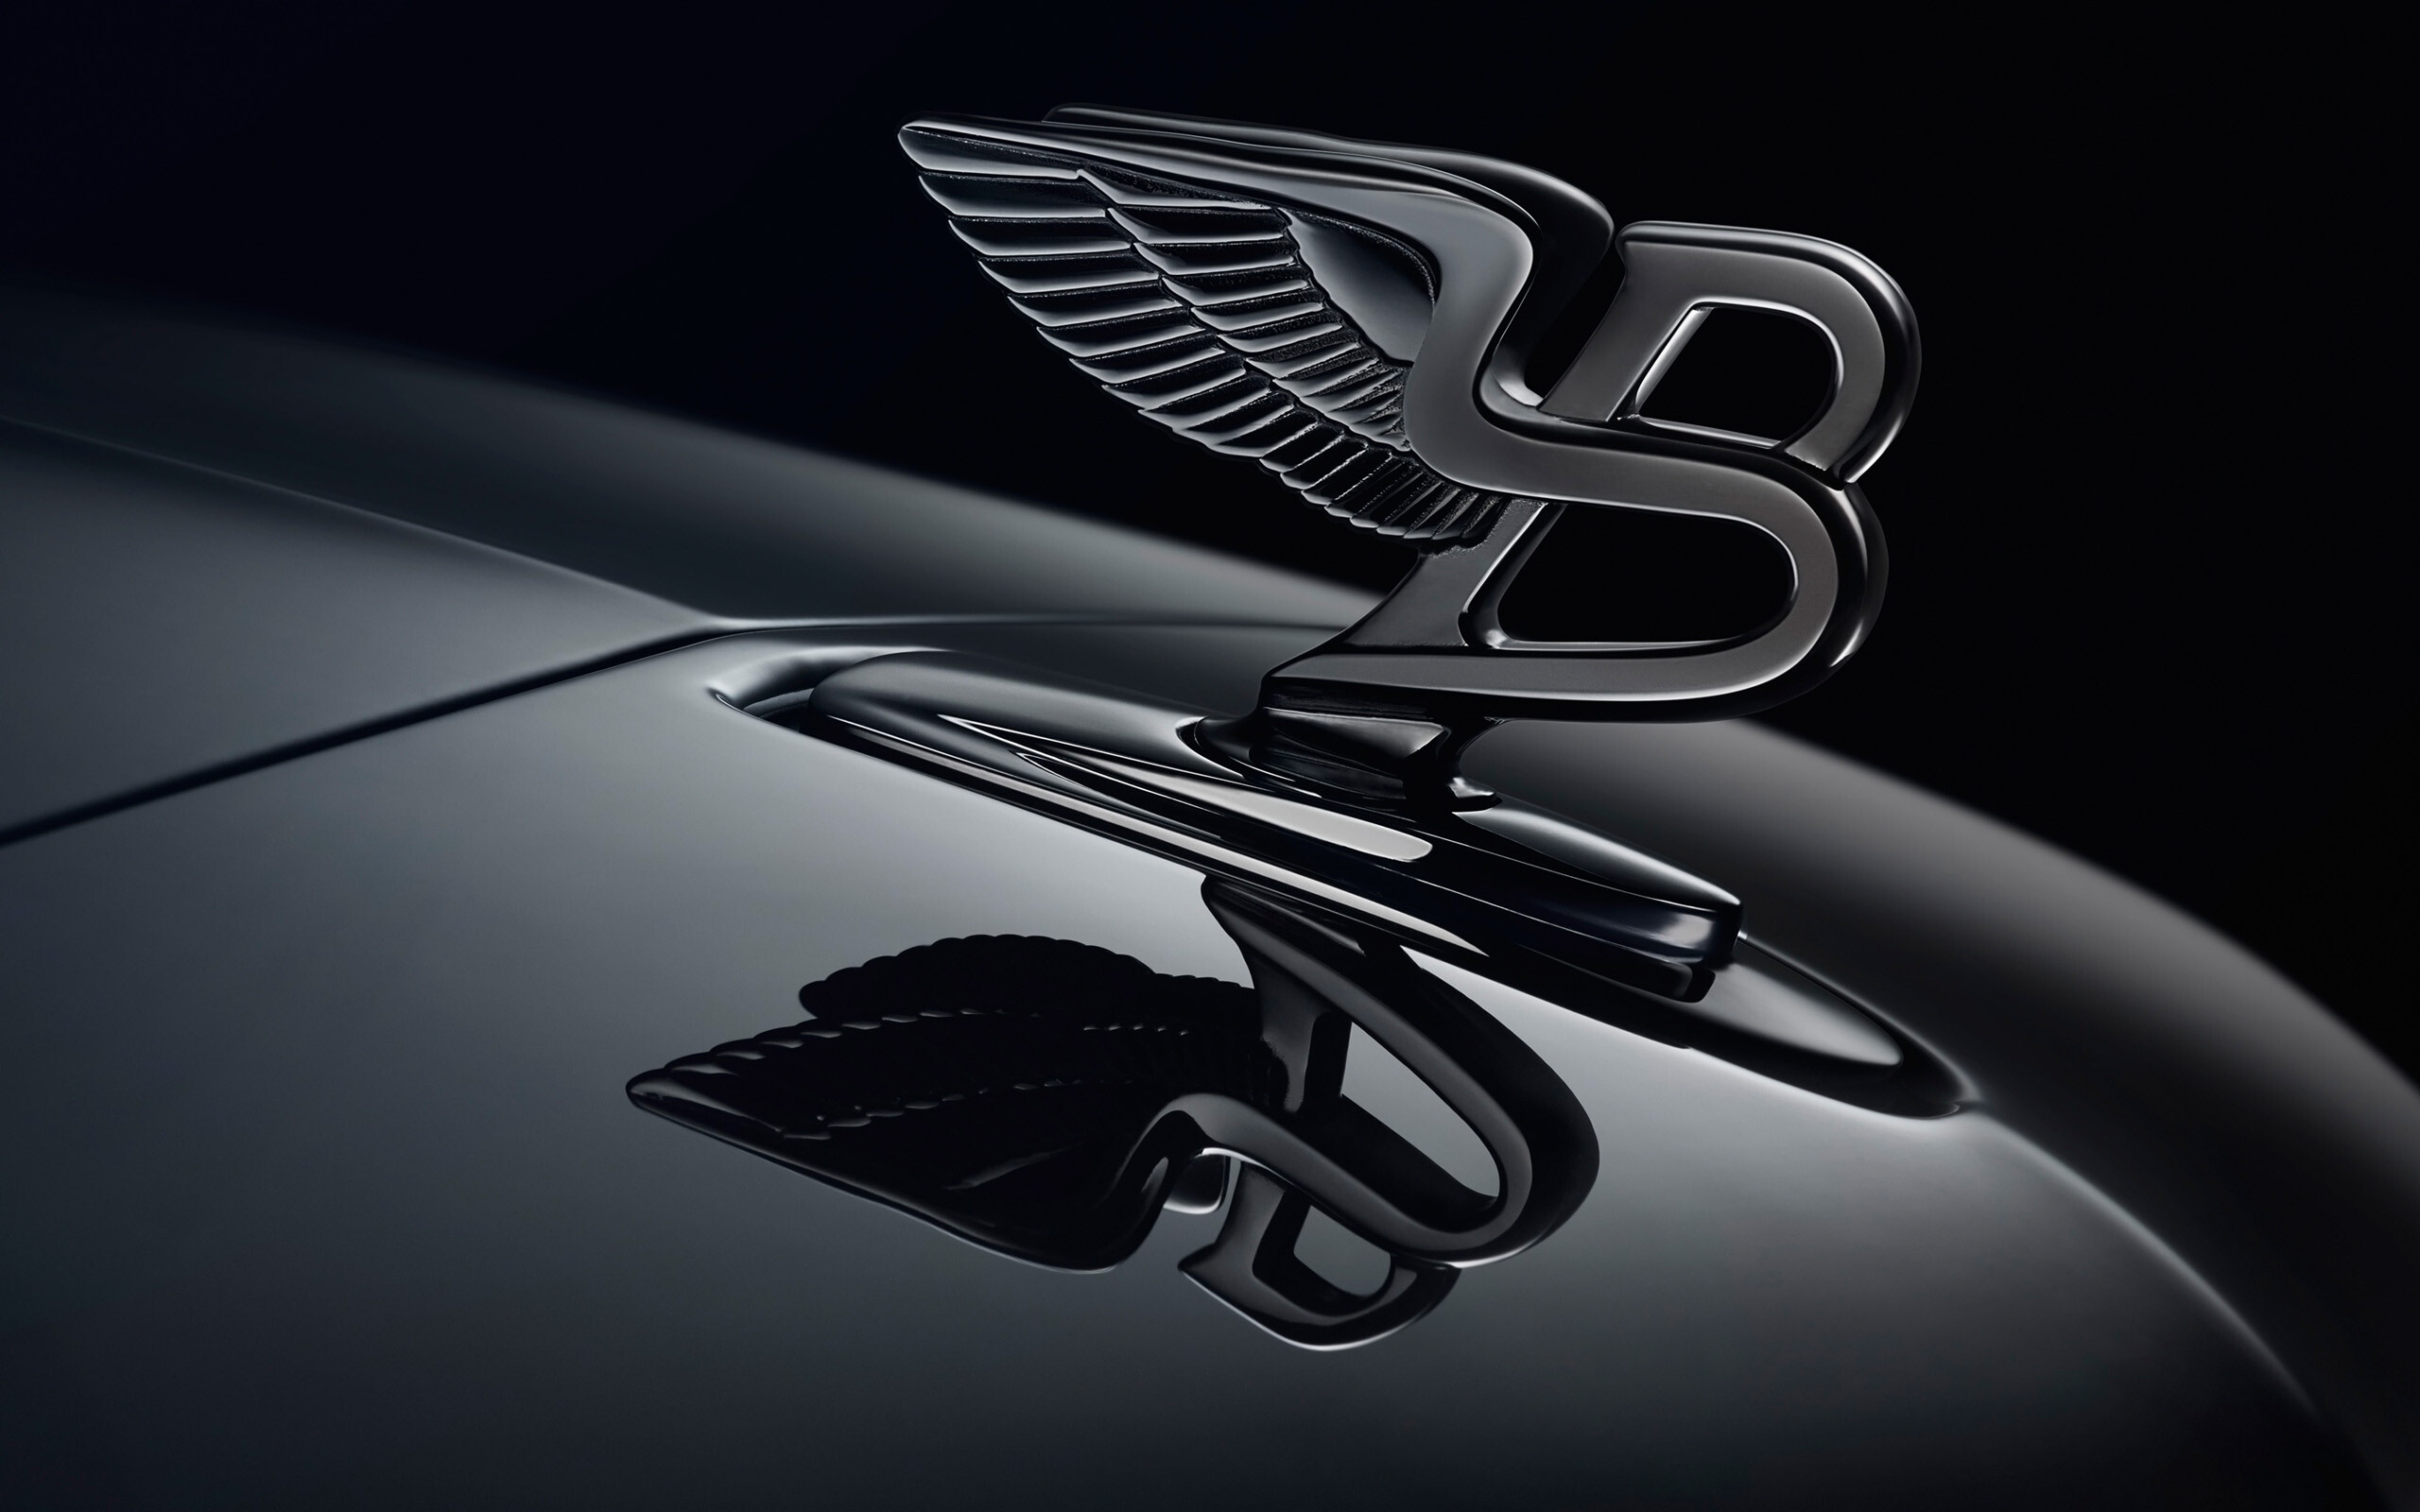 Bentley: According to the company, the wings on the logo are a symbol of the “celestial”. 2560x1600 HD Wallpaper.